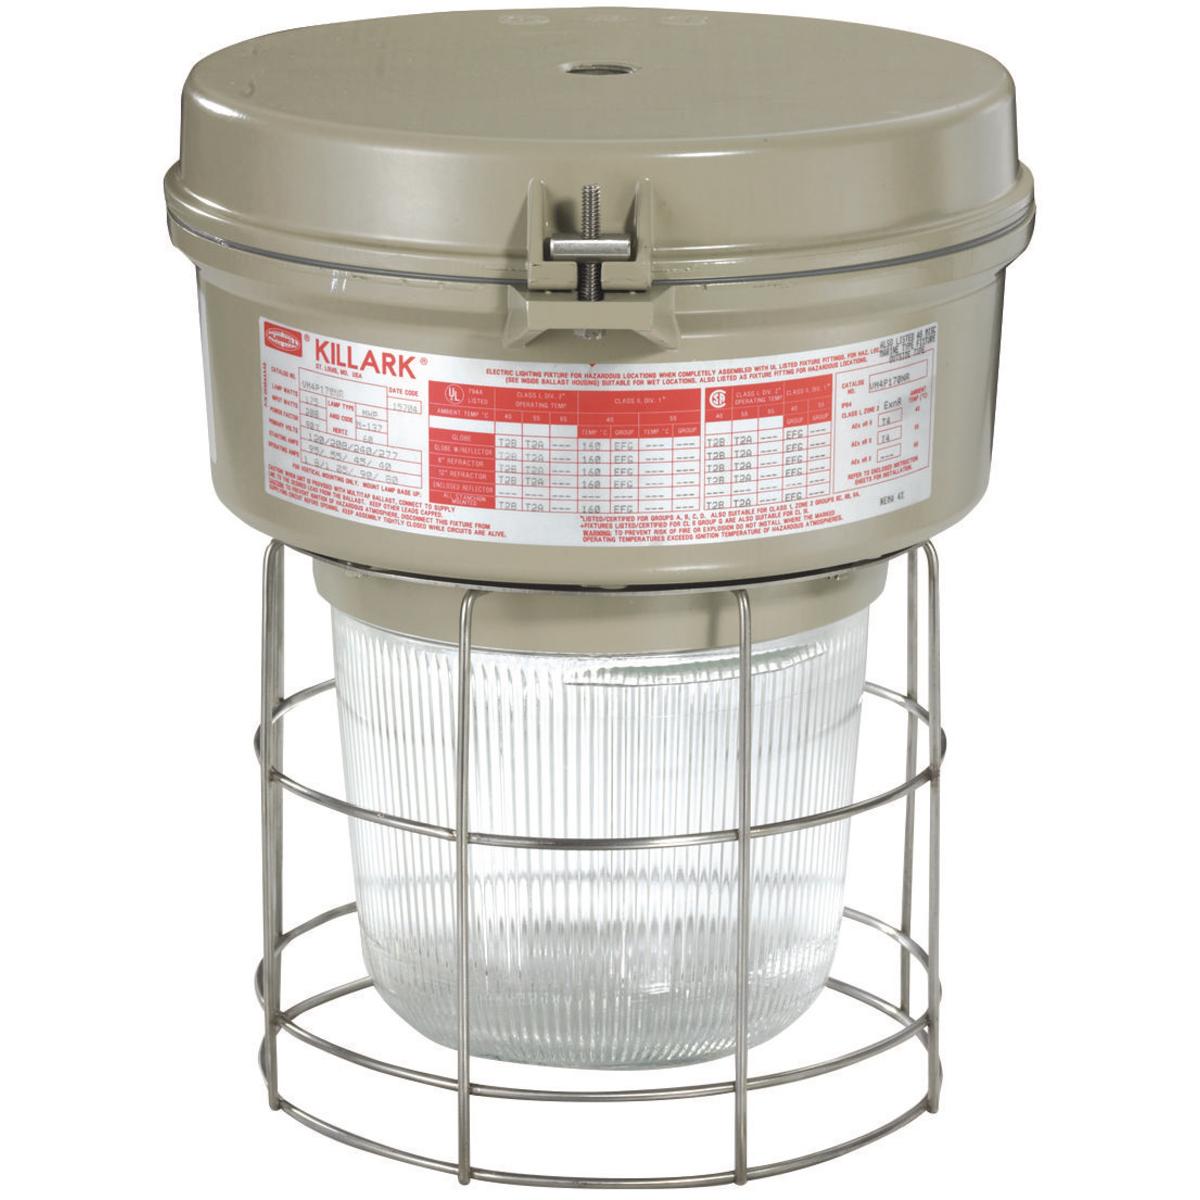 Hubbell VM4P170A2R1G VM4 Series - 175W Metal Halide Quadri-Volt - 3/4" Pendant - Type I Glass Refractor and Guard  ; Ballast tank and splice box – corrosion resistant copper-free aluminum alloy with baked powder epoxy/polyester finish, electrostatically applied for complete, 